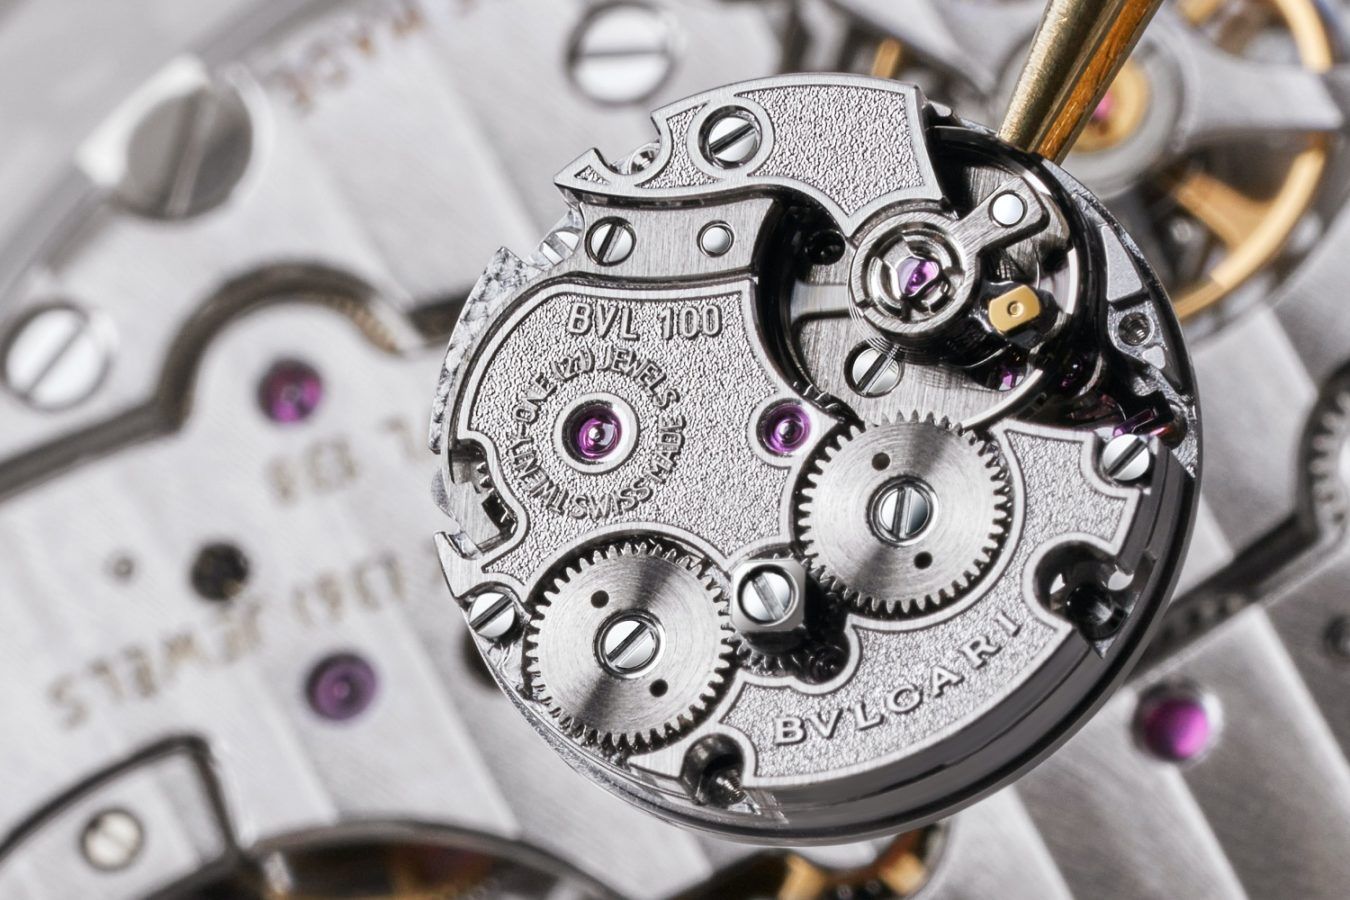 Bvlgari’s Smallest Movement Yet Marks an Exciting Time for Watchmaking